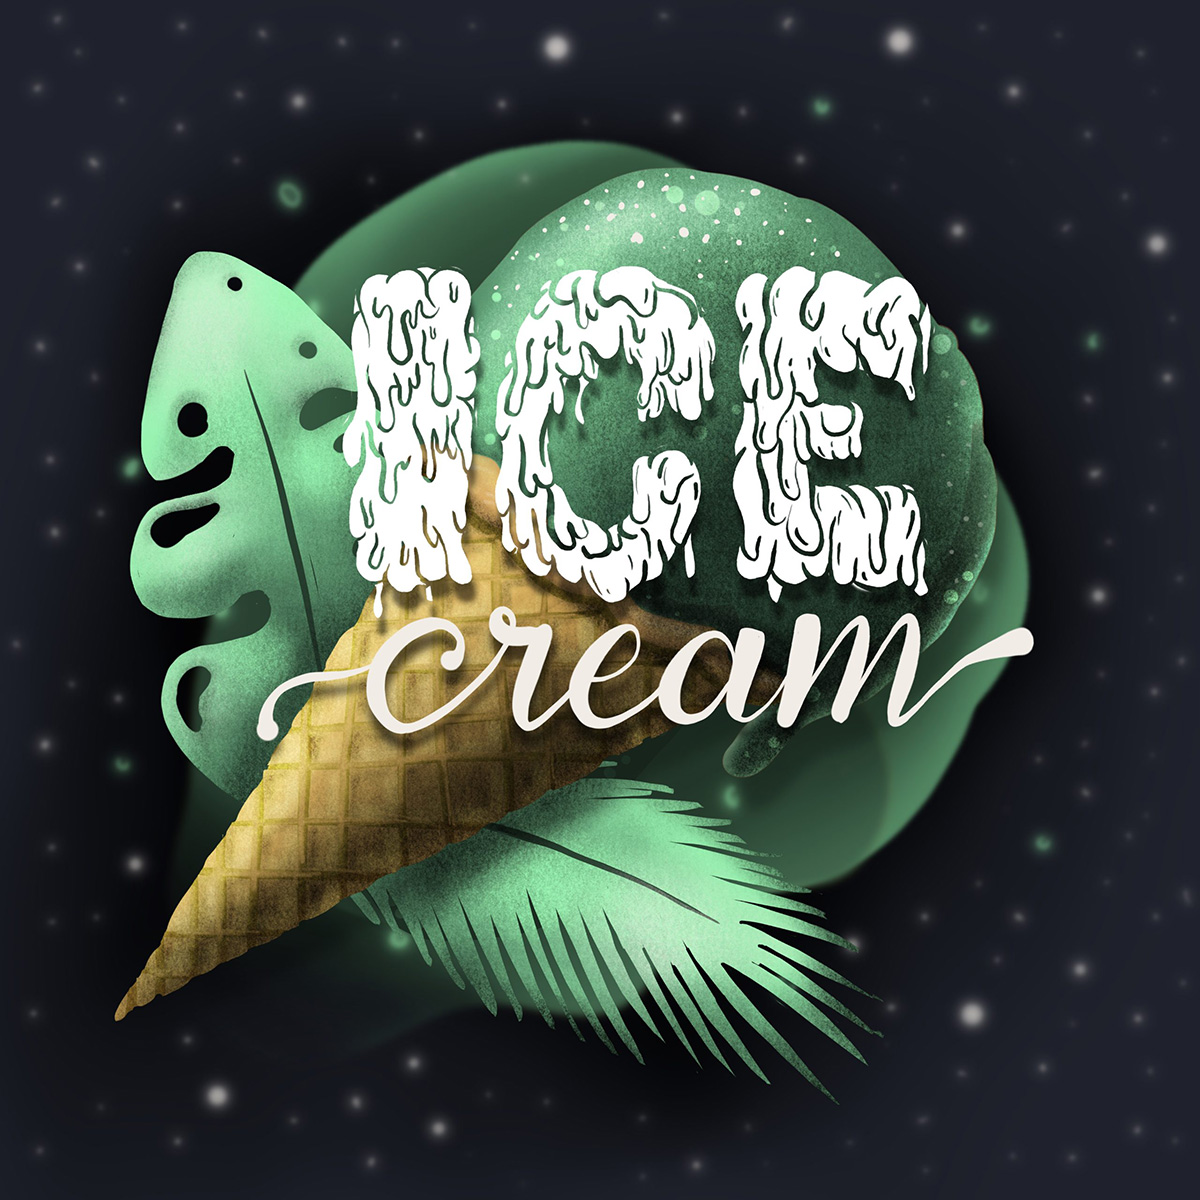 lettering and illustration - ice cream